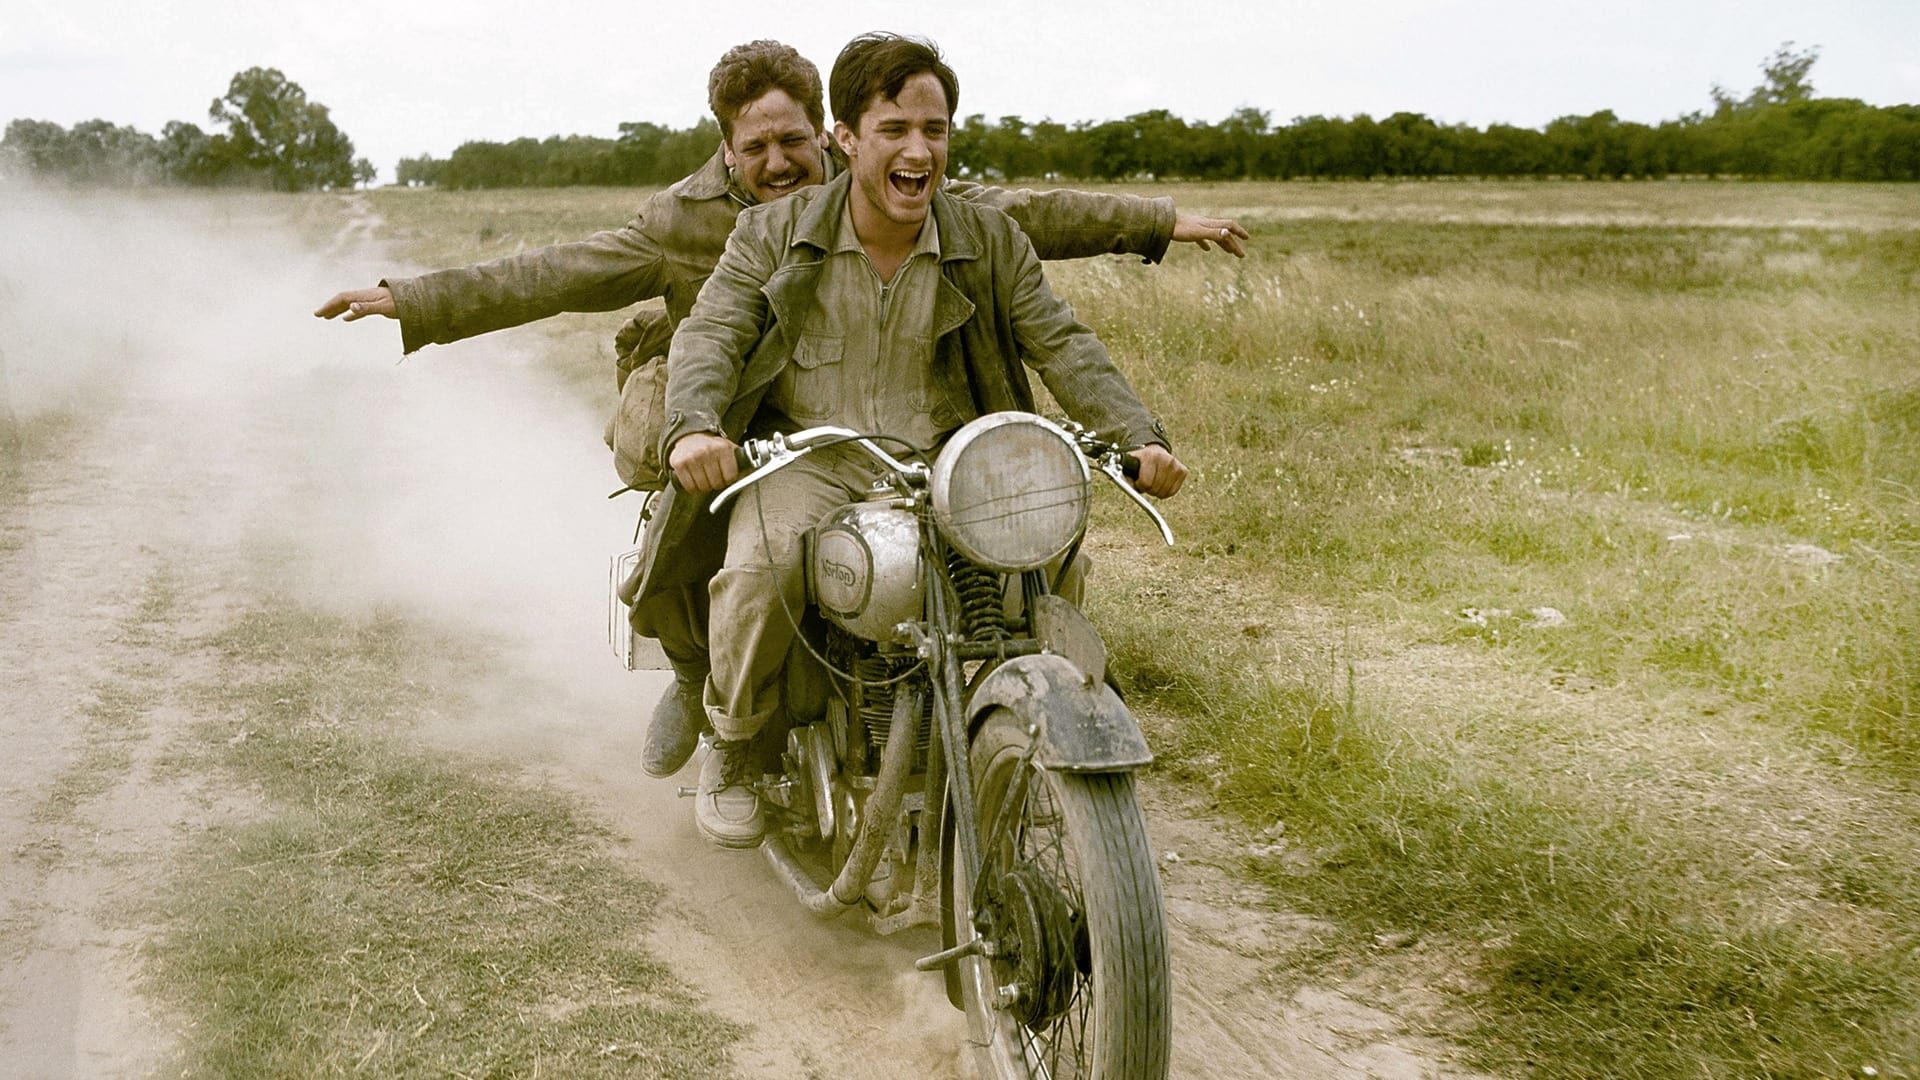 The Motorcycle Diaries Backdrop